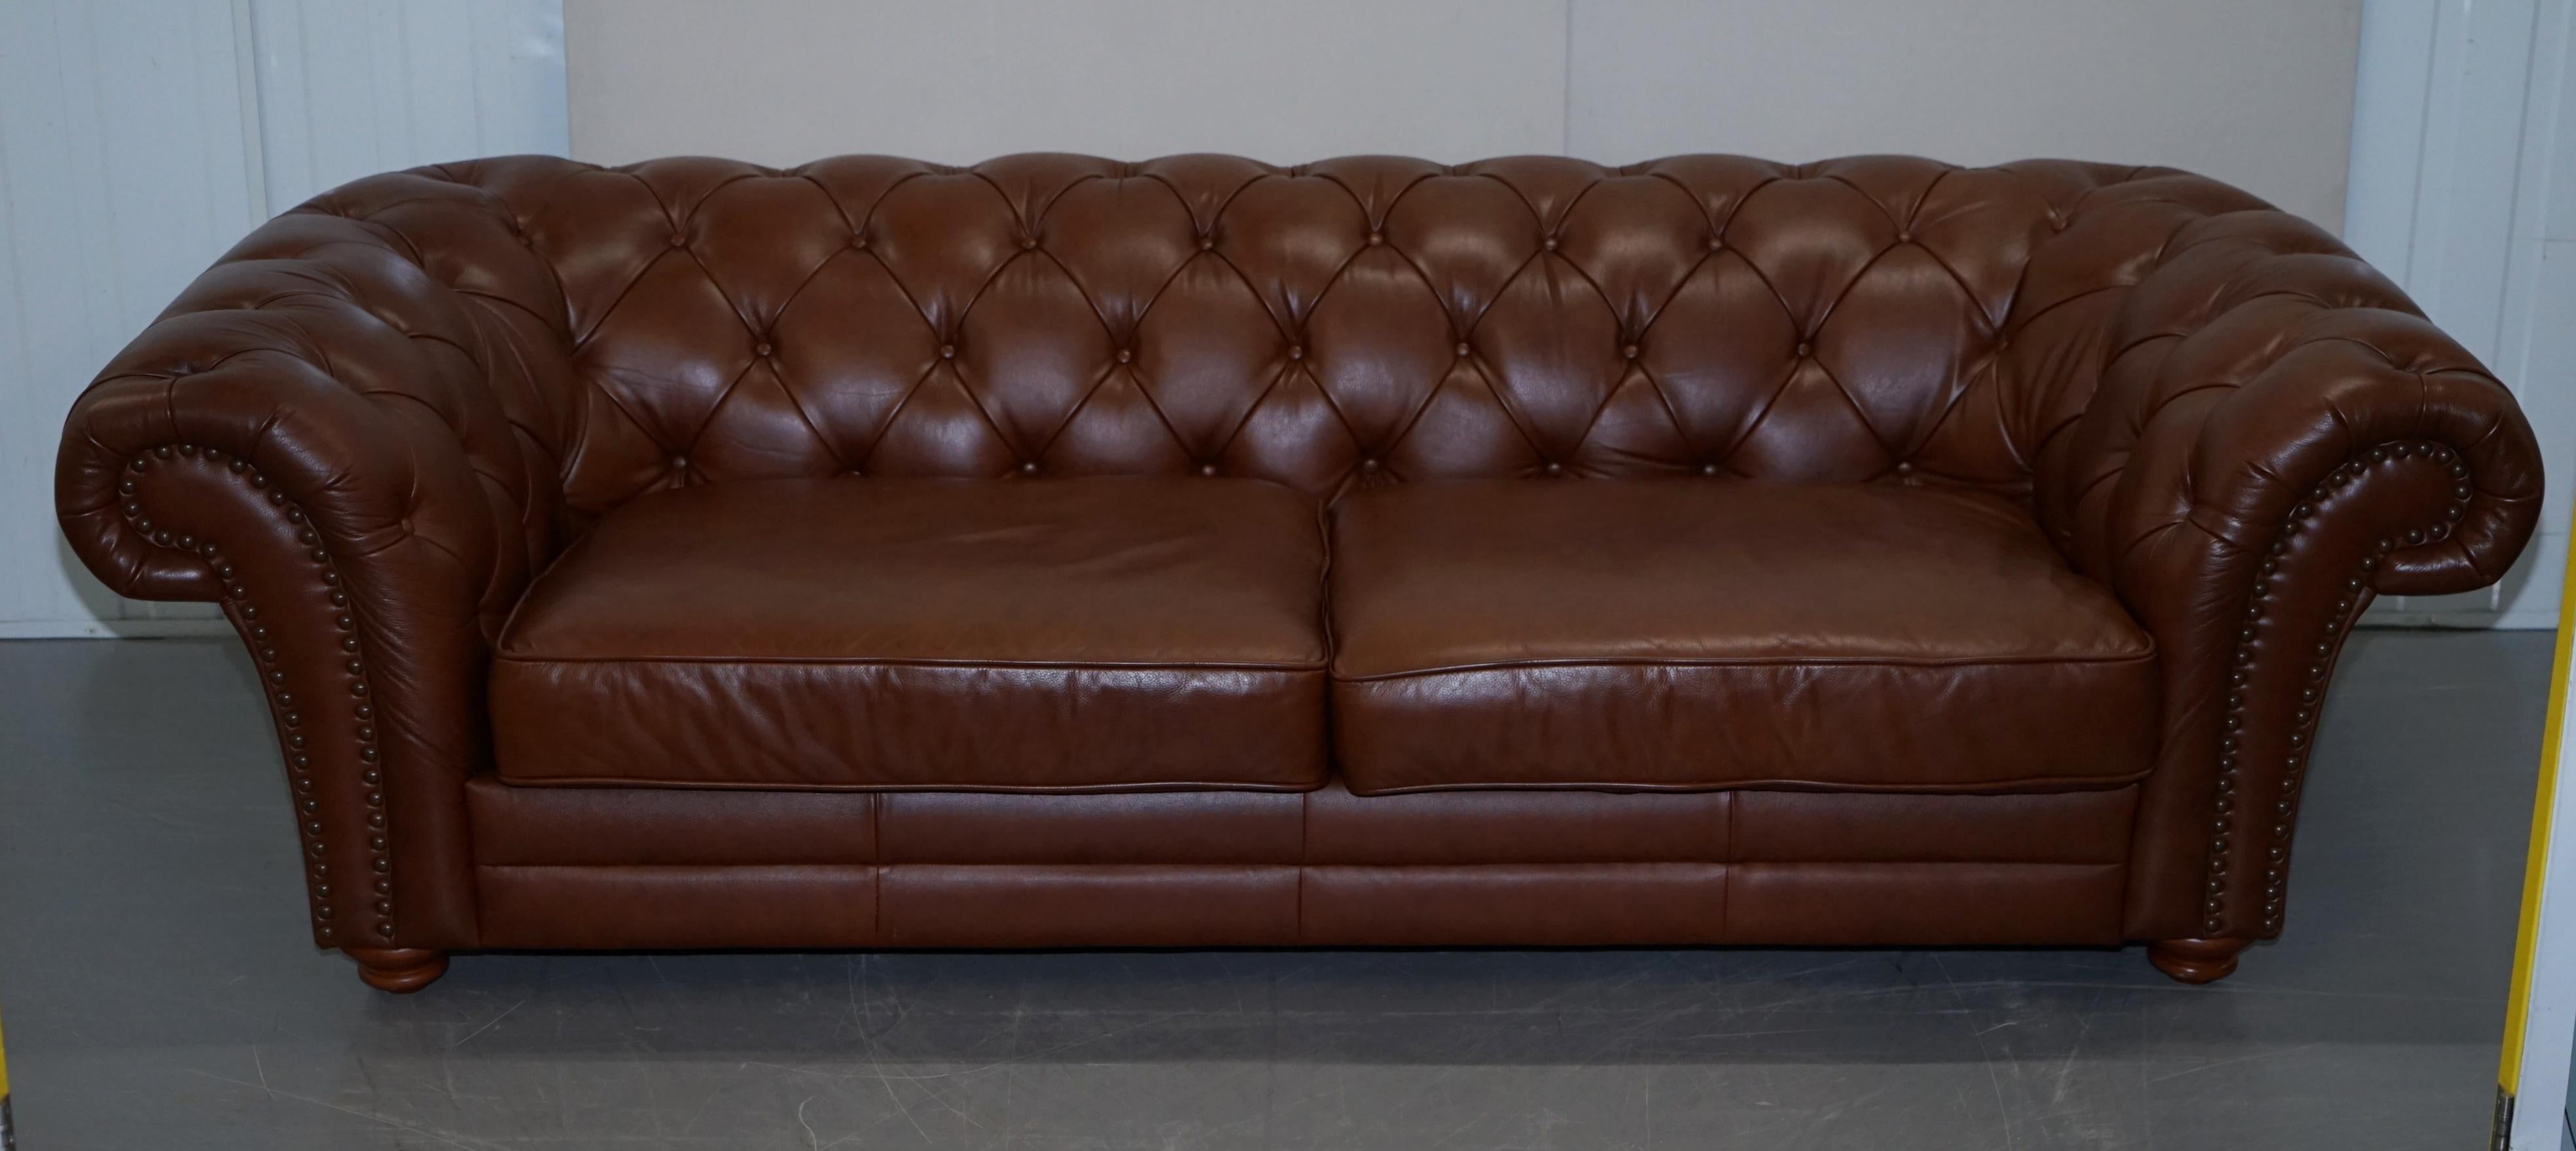 sofas made in england